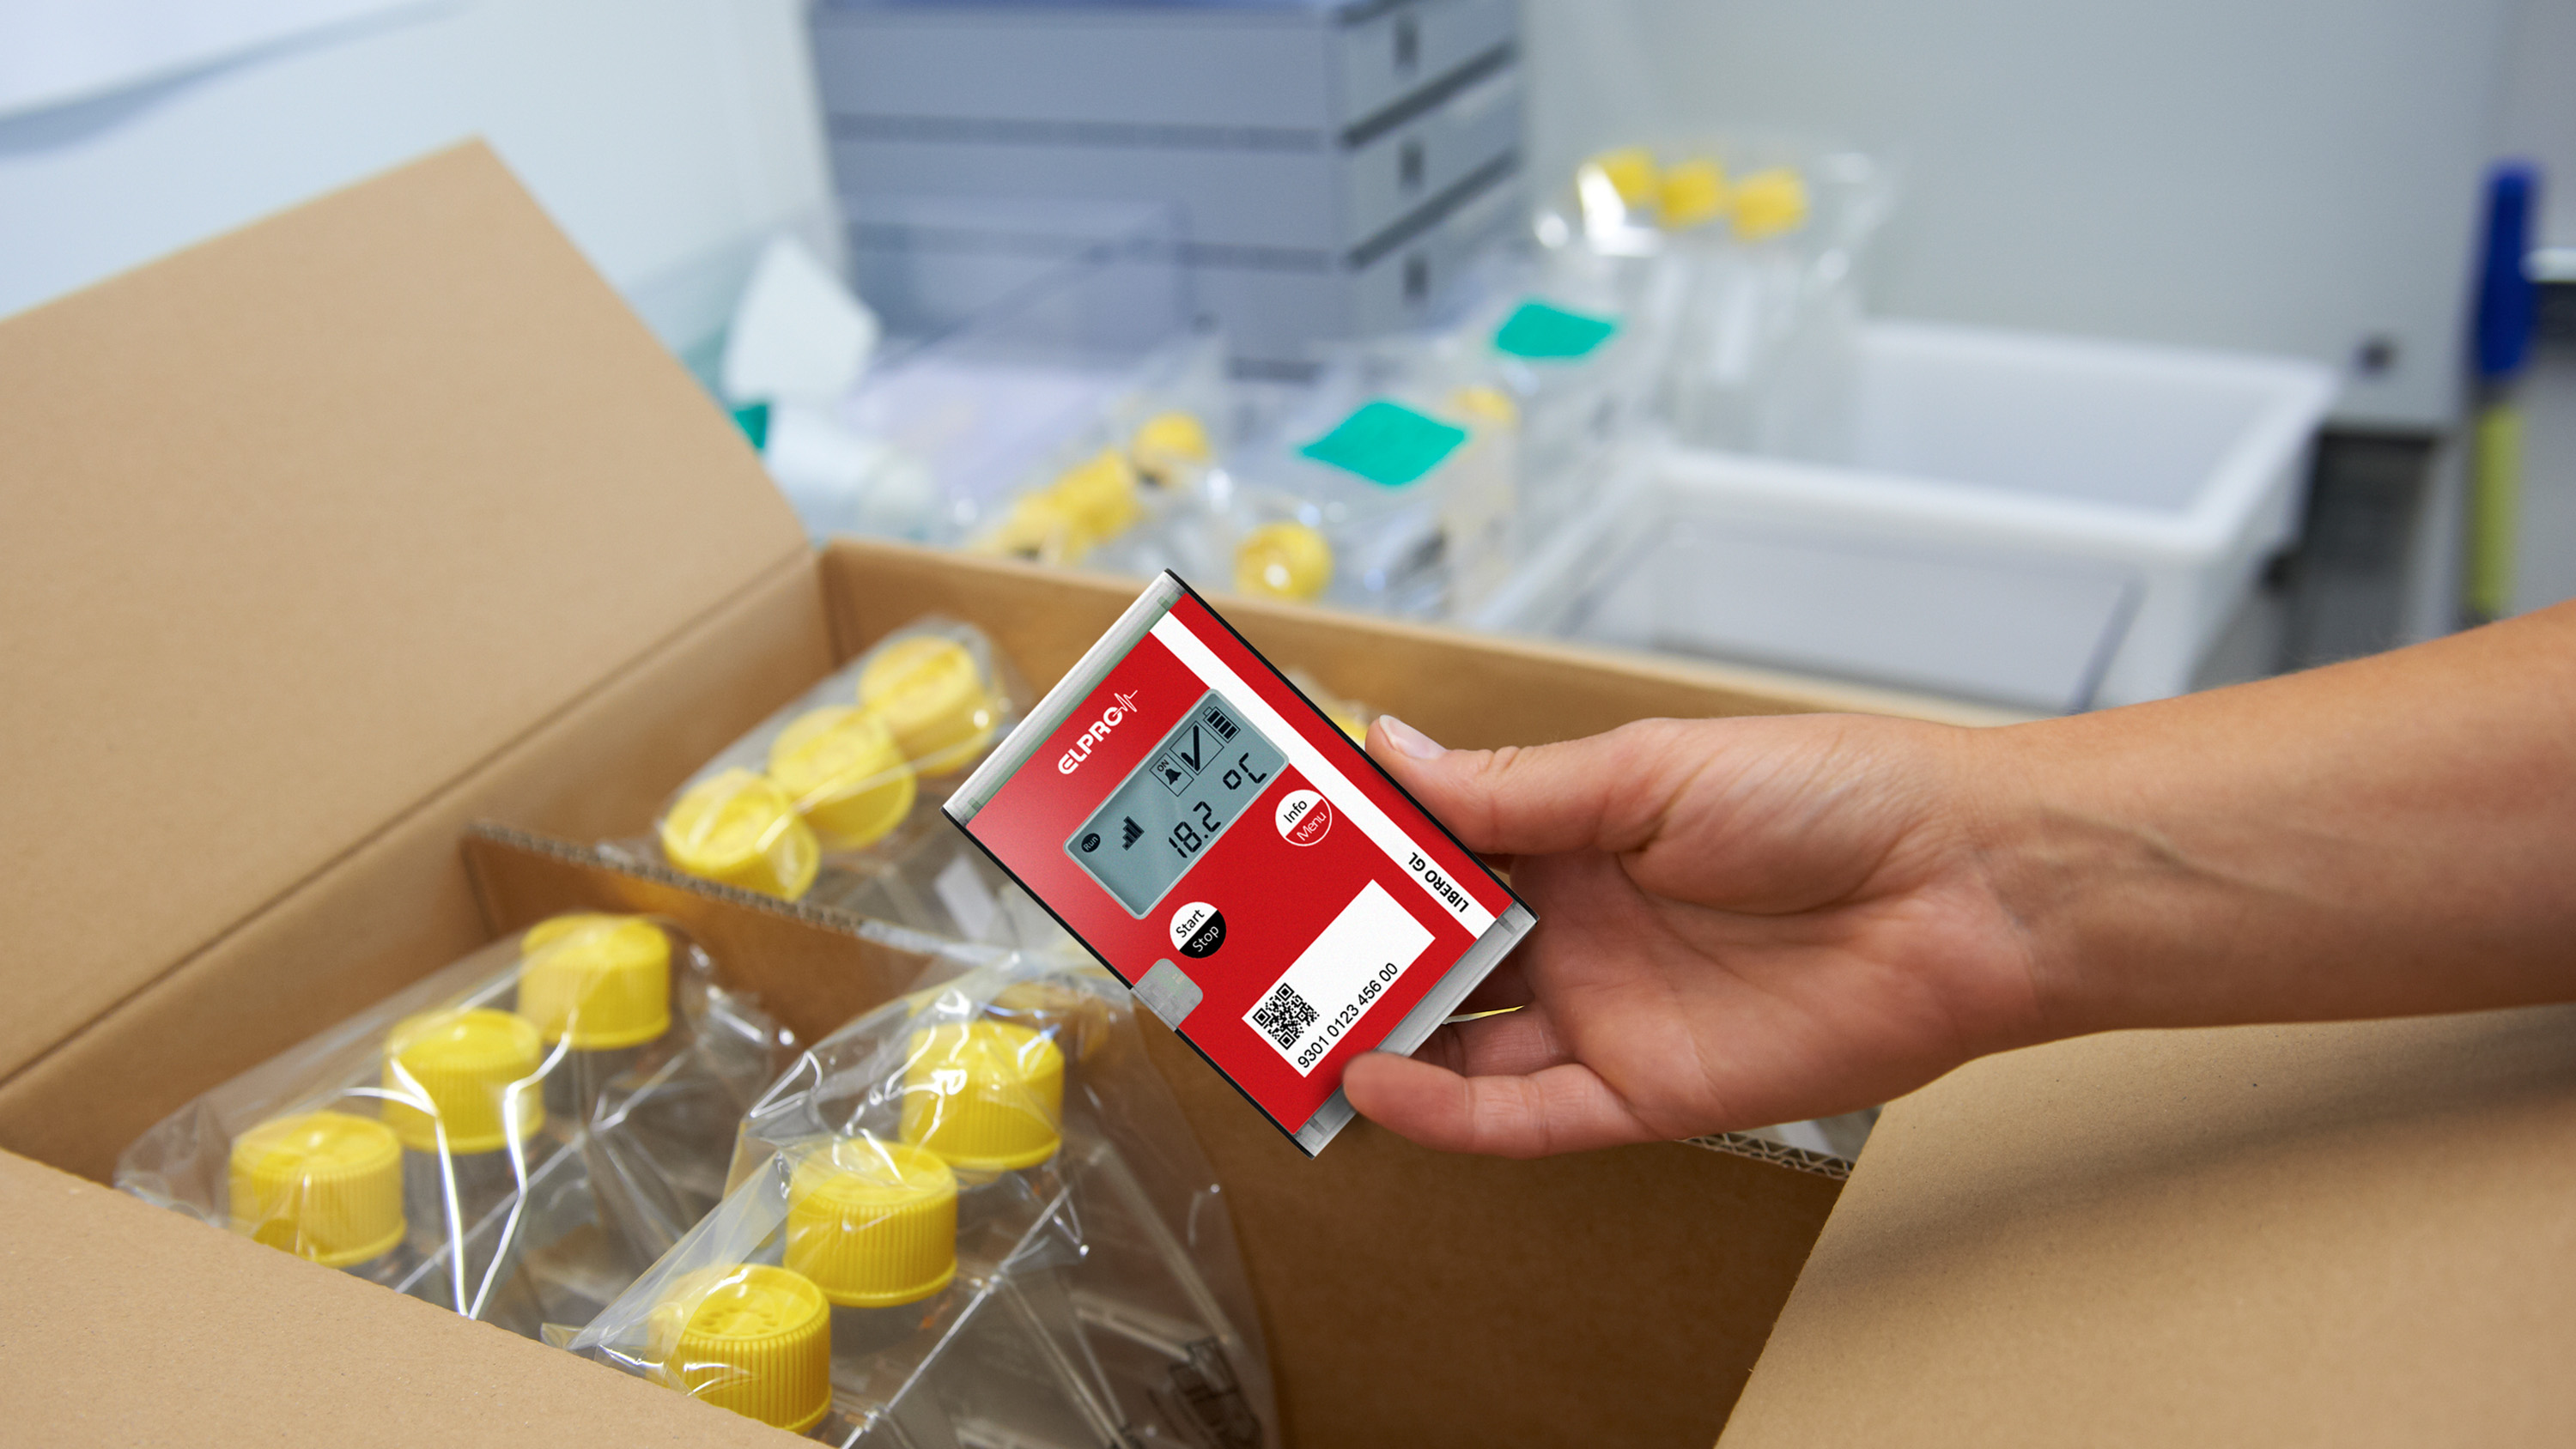 ELPRO LIBERO G real-time data logger for monitoring temperature and position is placed into a shipping container for pharmaceutical products